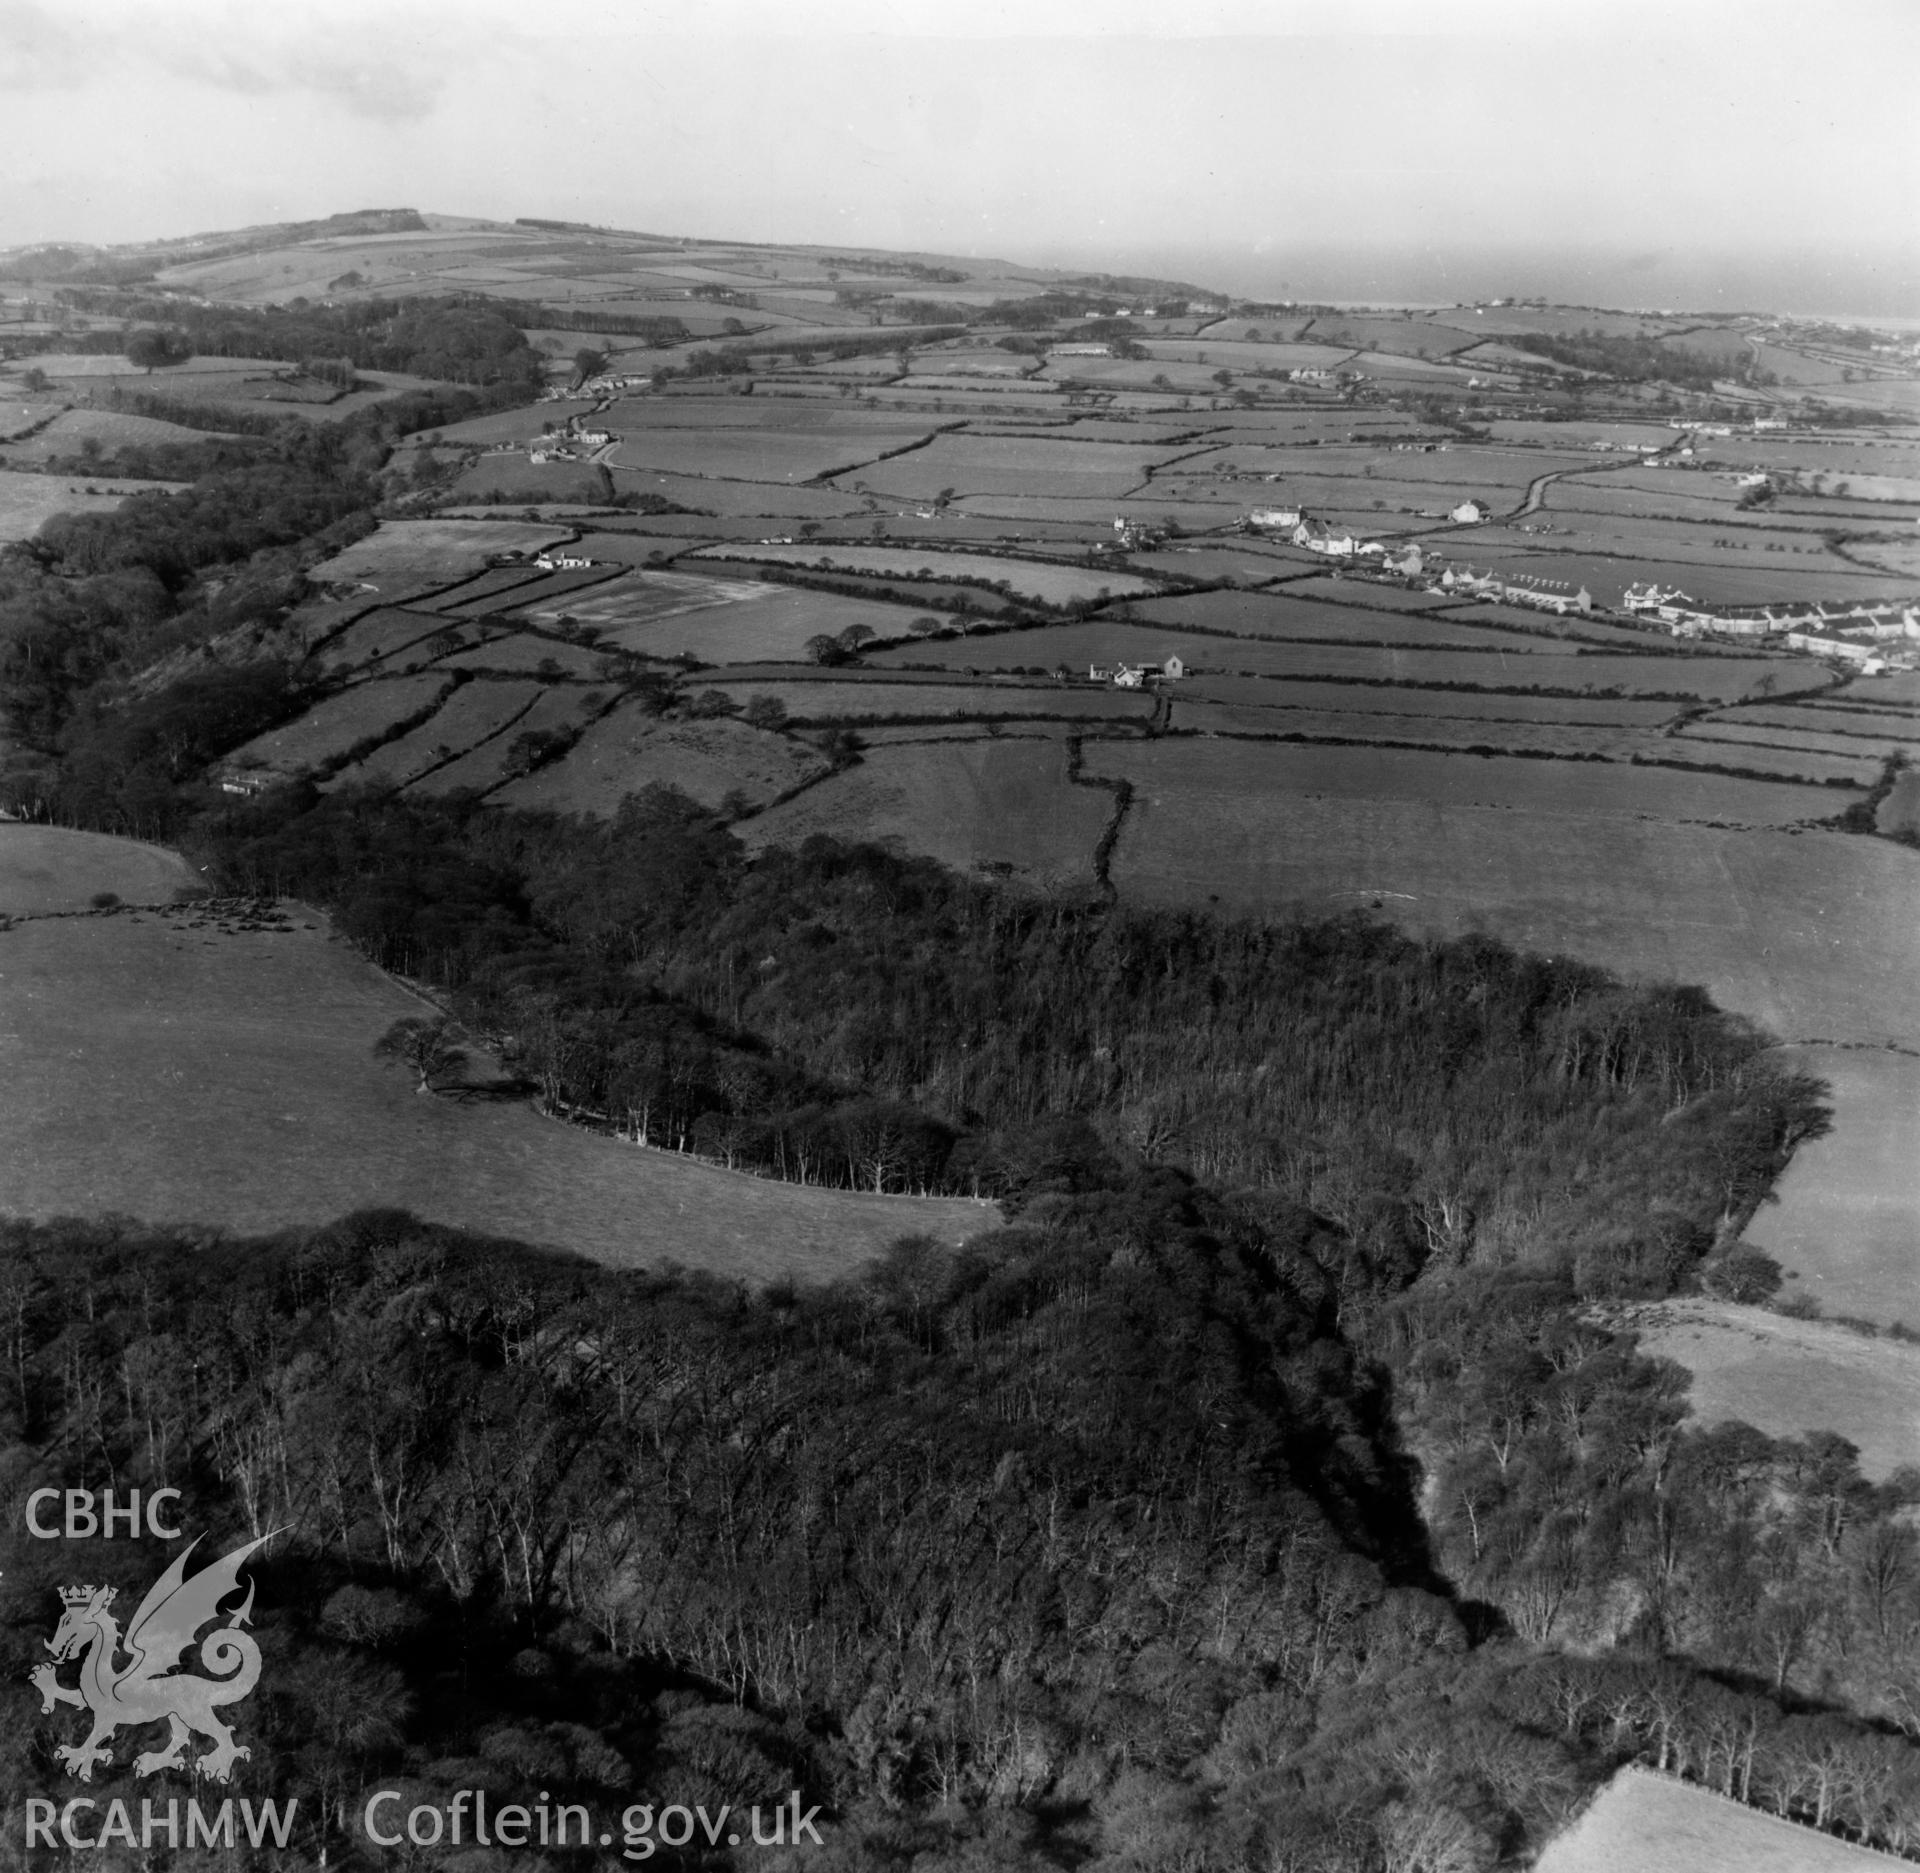 View of Garth Dingle near Penyffordd looking towards Point of Ayr. Oblique aerial photograph, 5?" cut roll film.